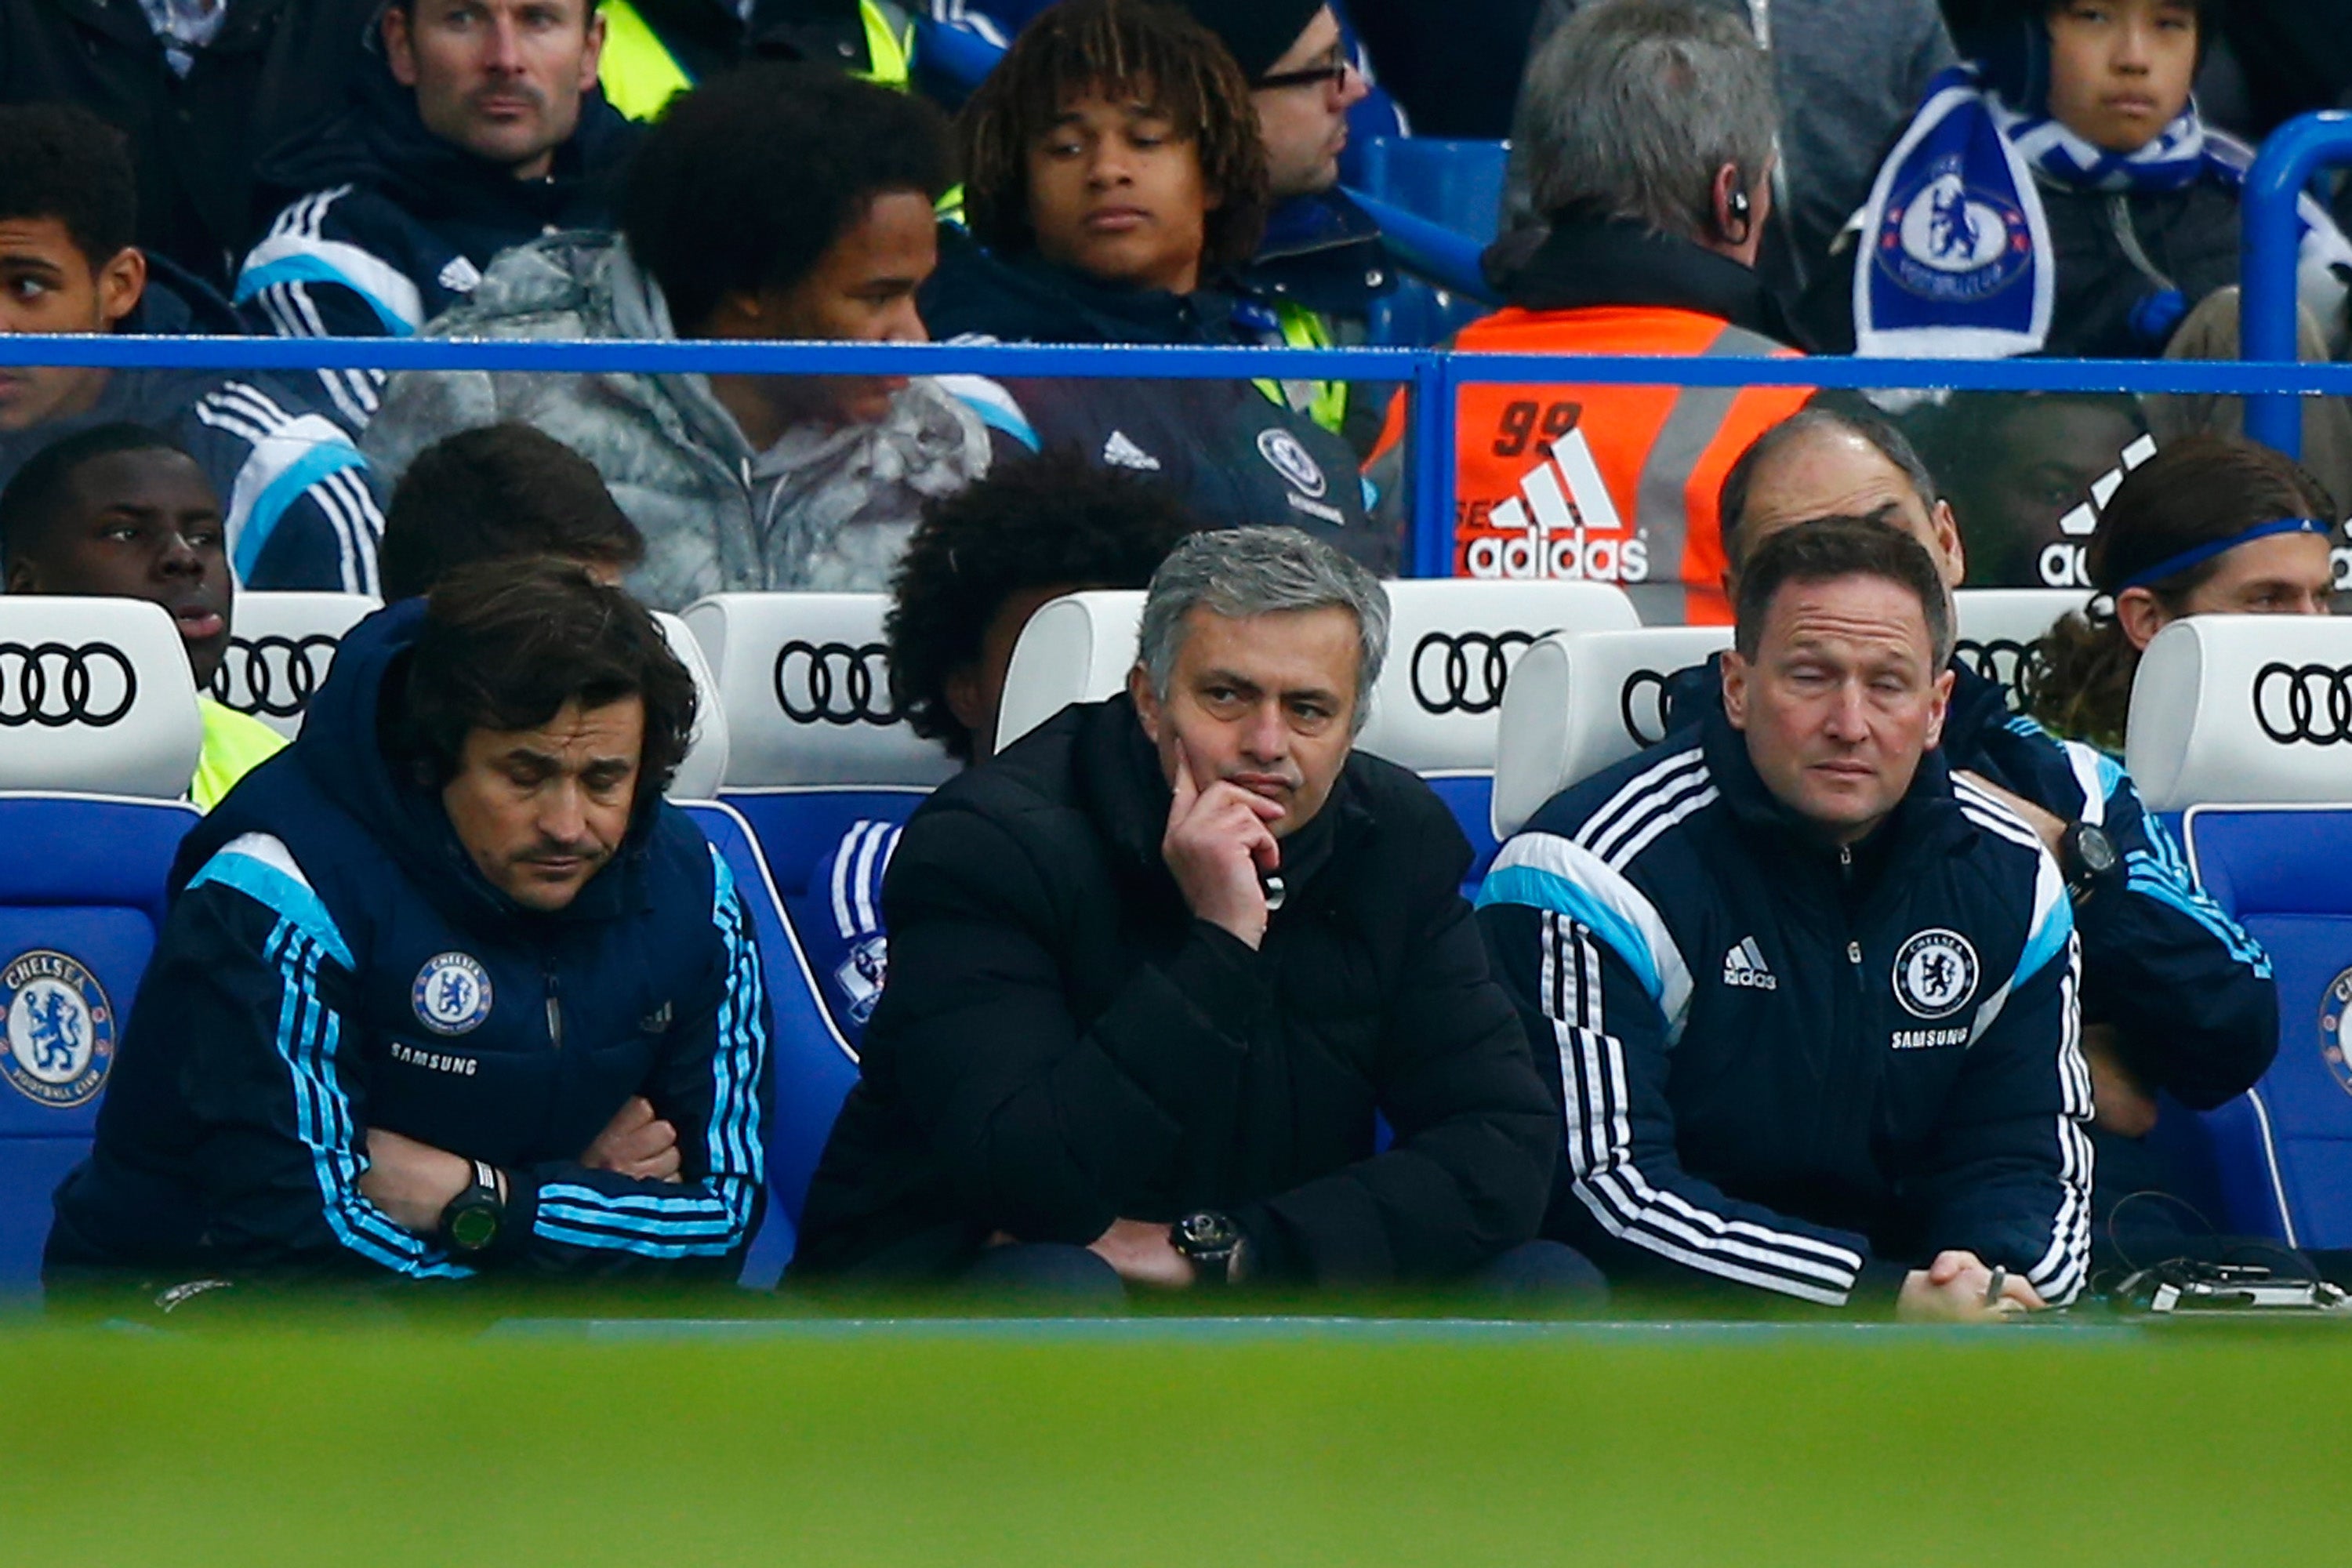 Jose Mourinho's team should win the title from here on in